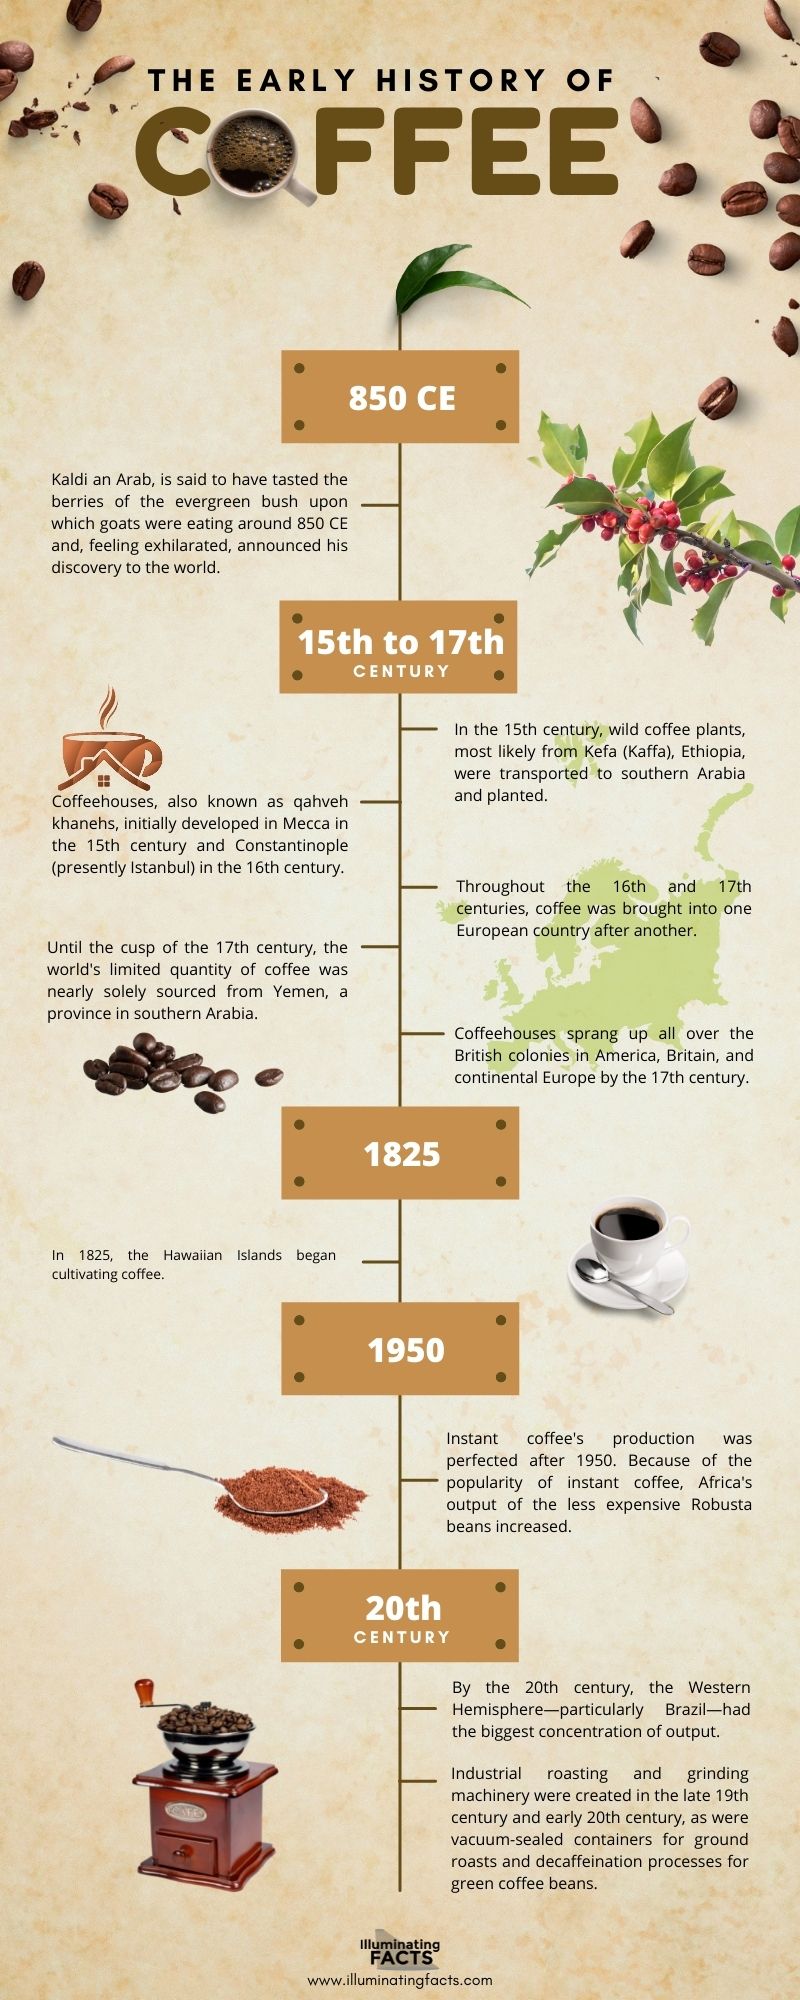 The early history of coffee